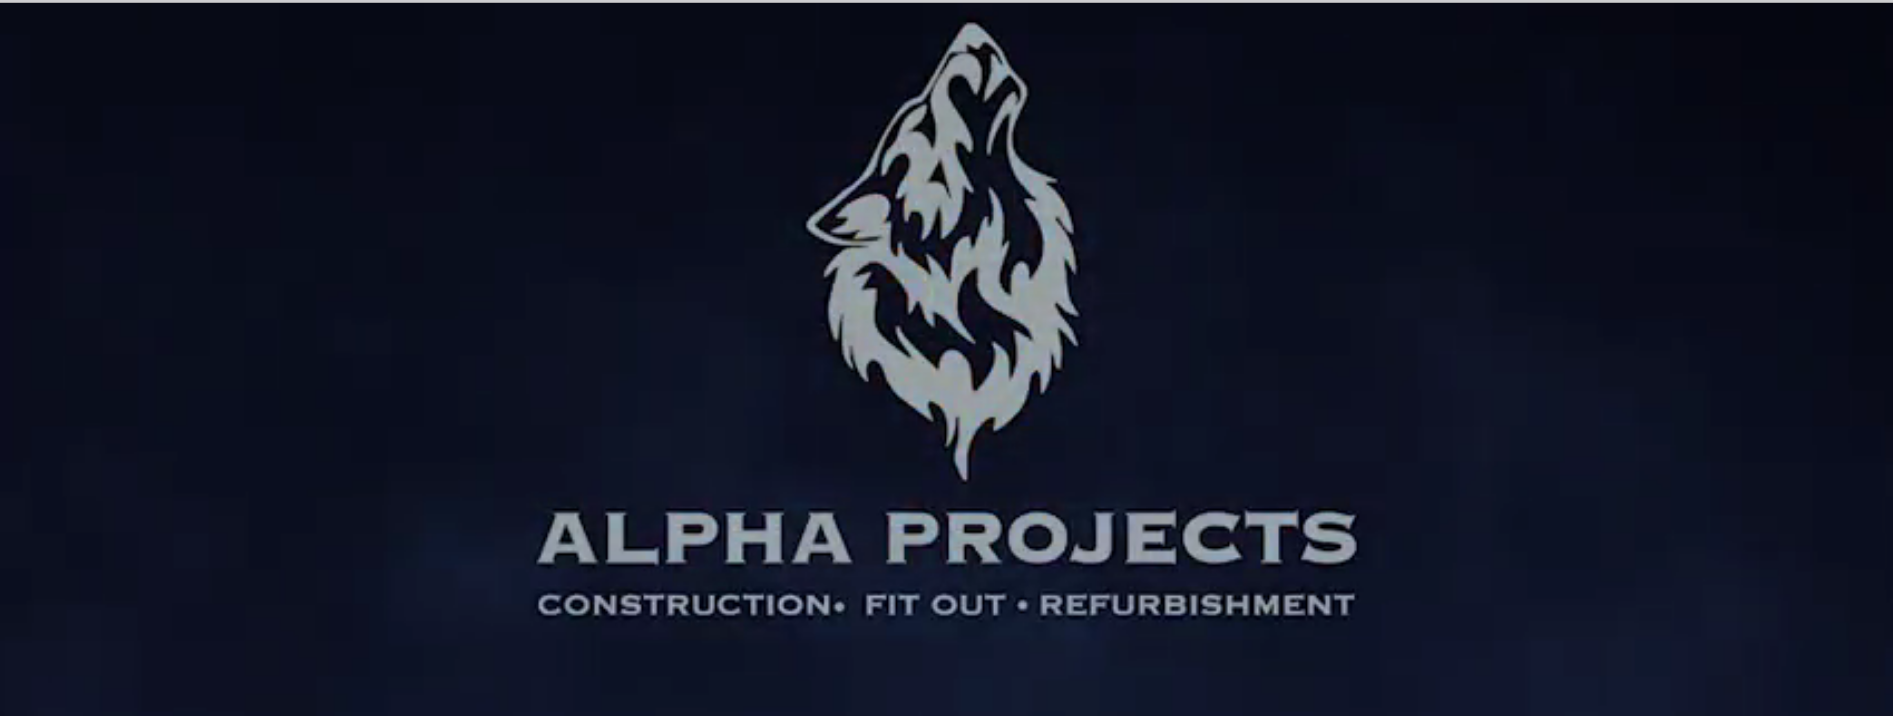 Alpha Projects Principal Contractor, Specialising In Construction, Fit-Out & Refurbishment Projects